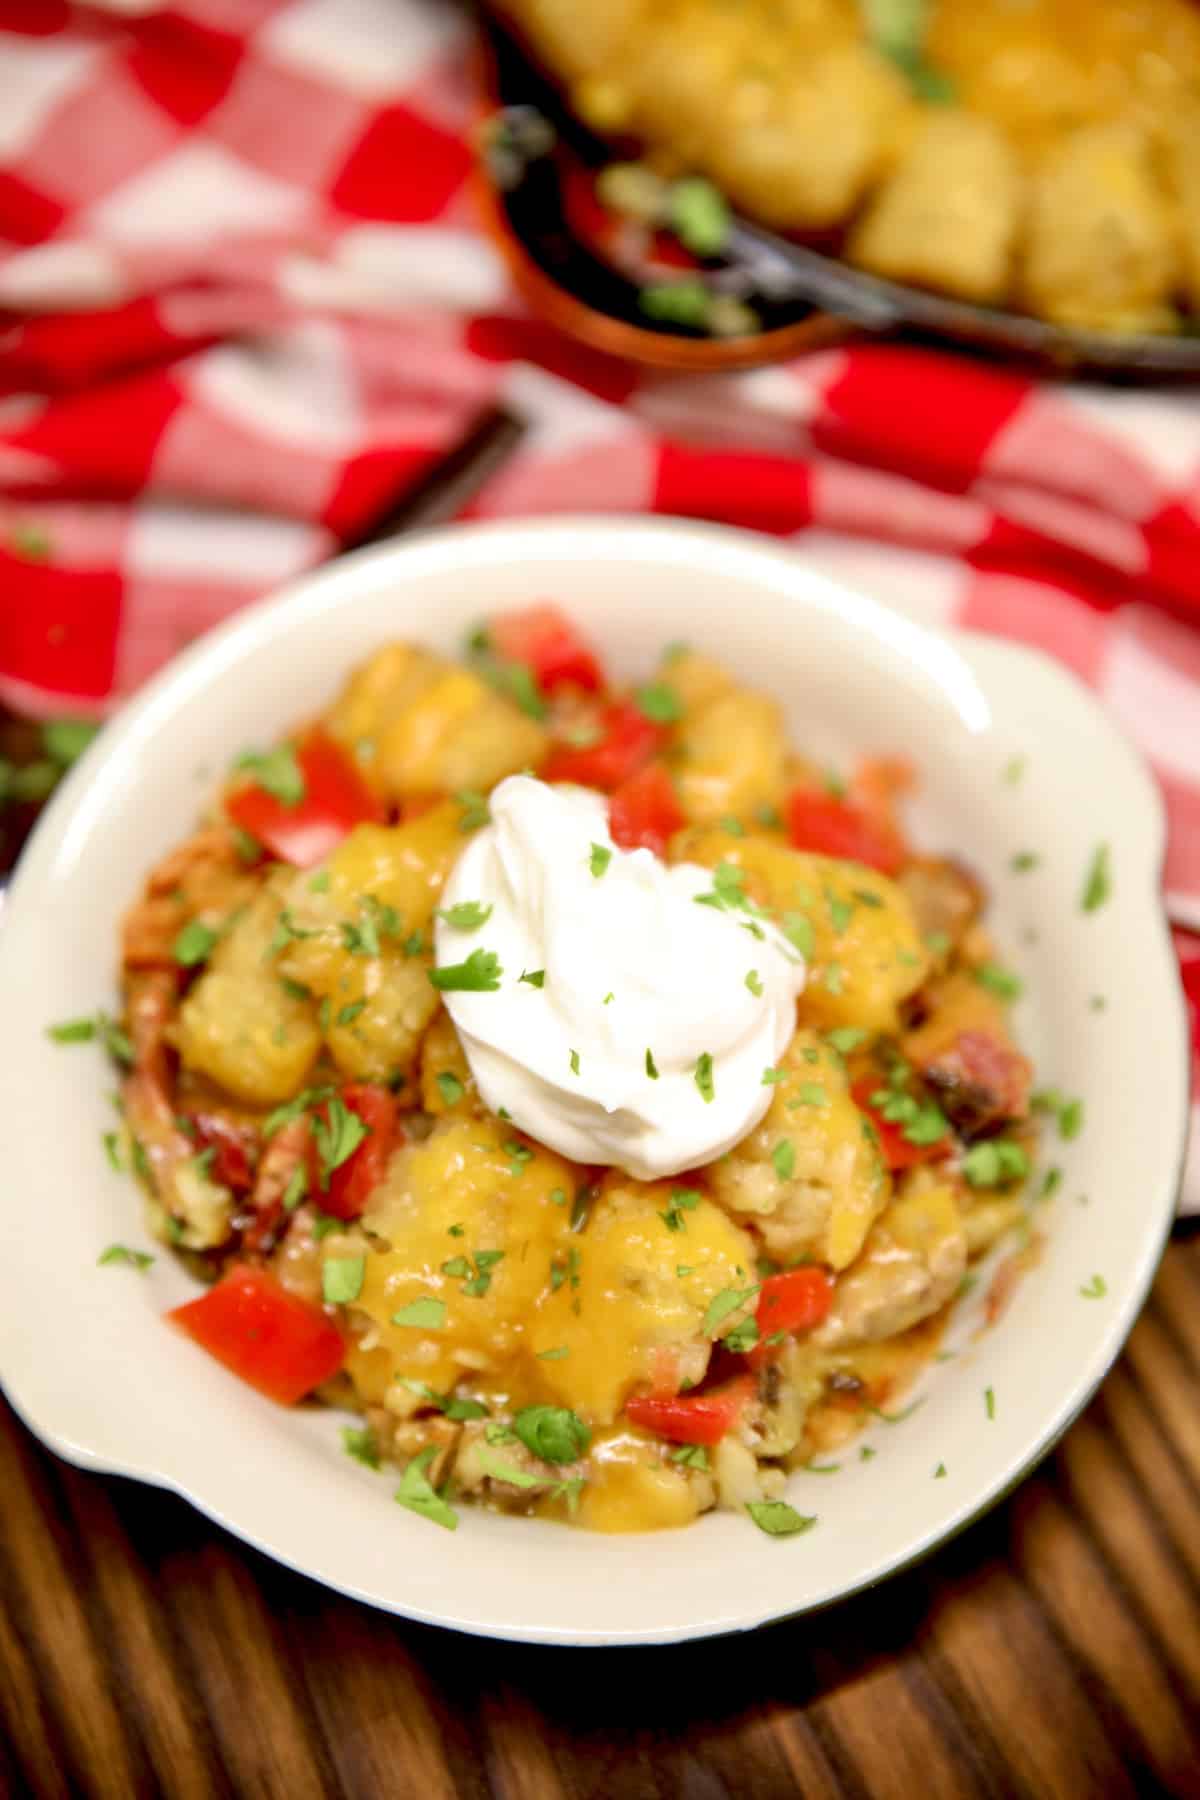 Bowl of cowboy casserole with course cream and tomatoes.